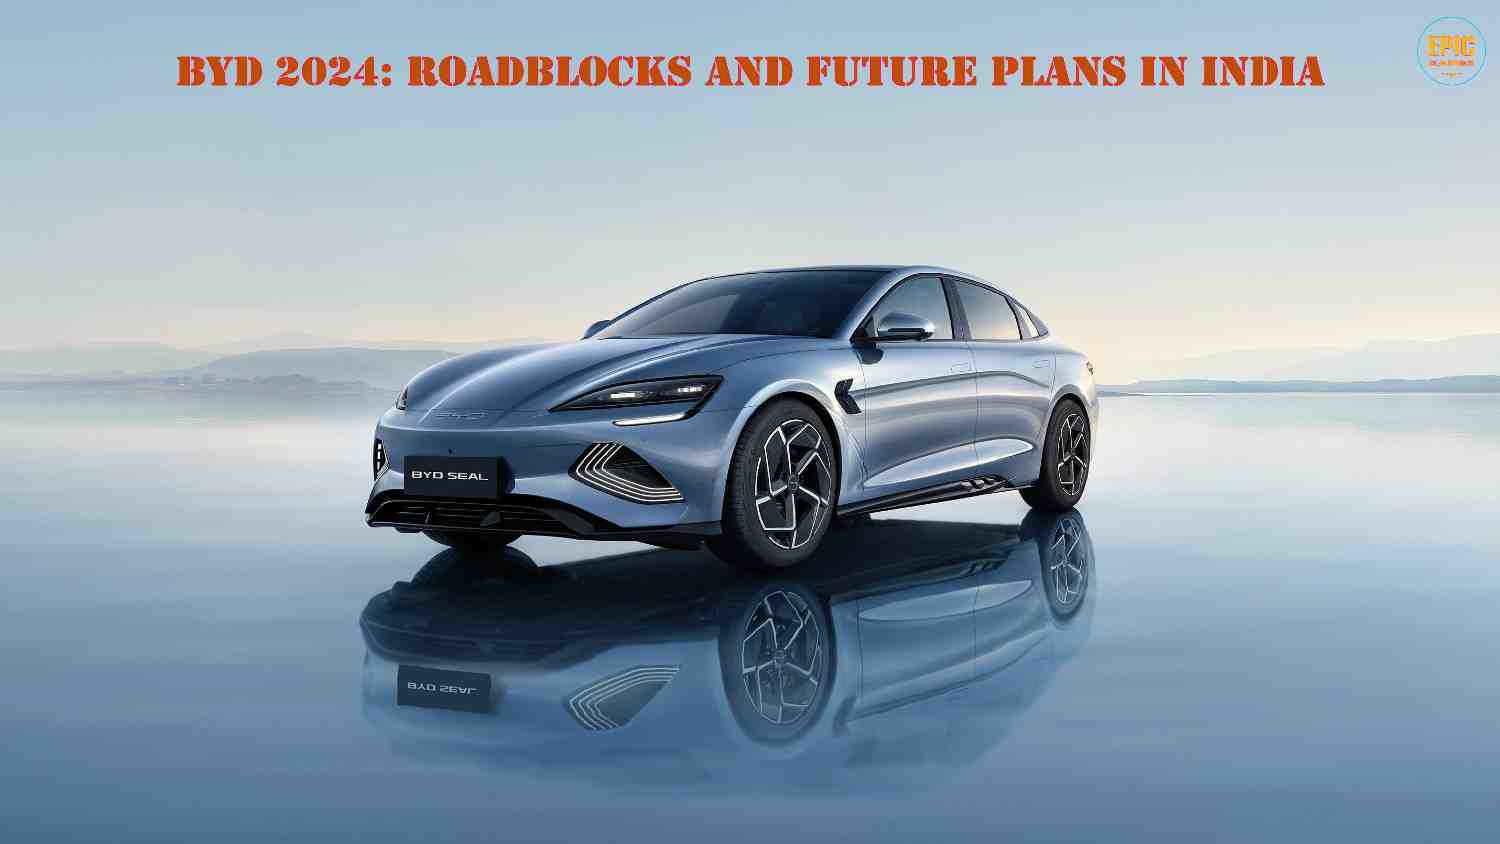 BYD 2024: Roadblocks and Future Plans in India